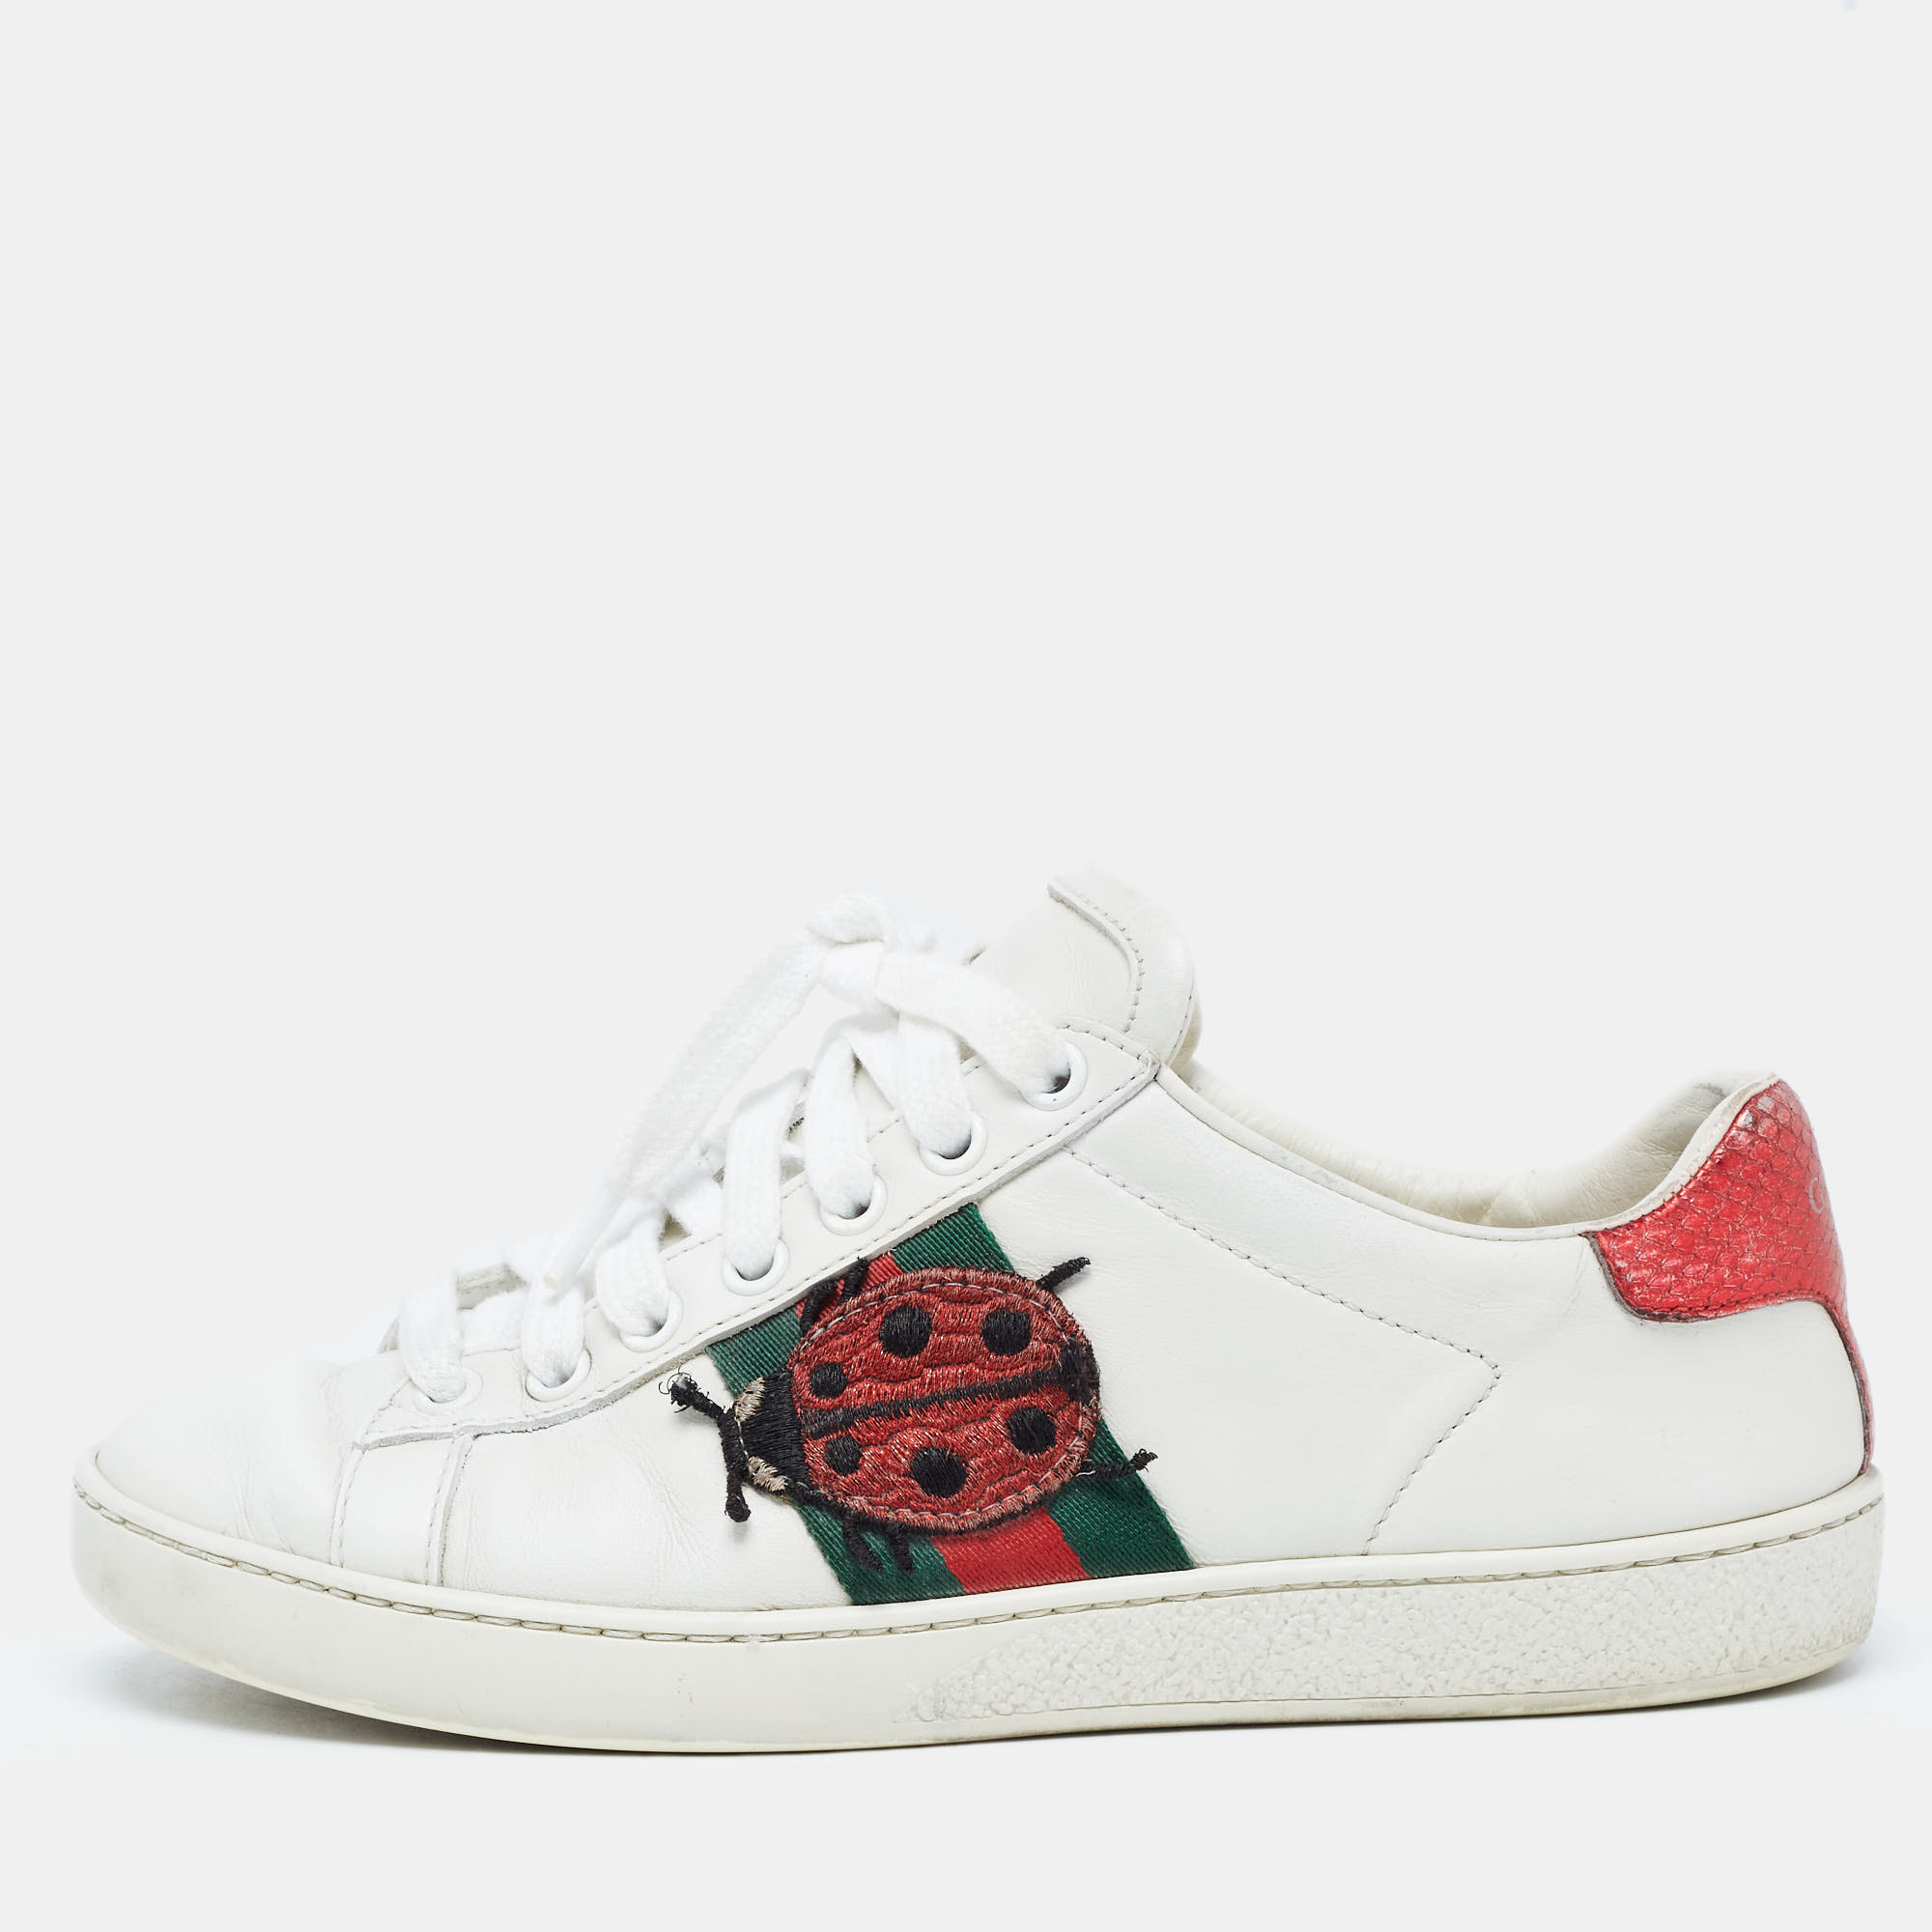 Gucci white leather web ace sneakers size 34.5